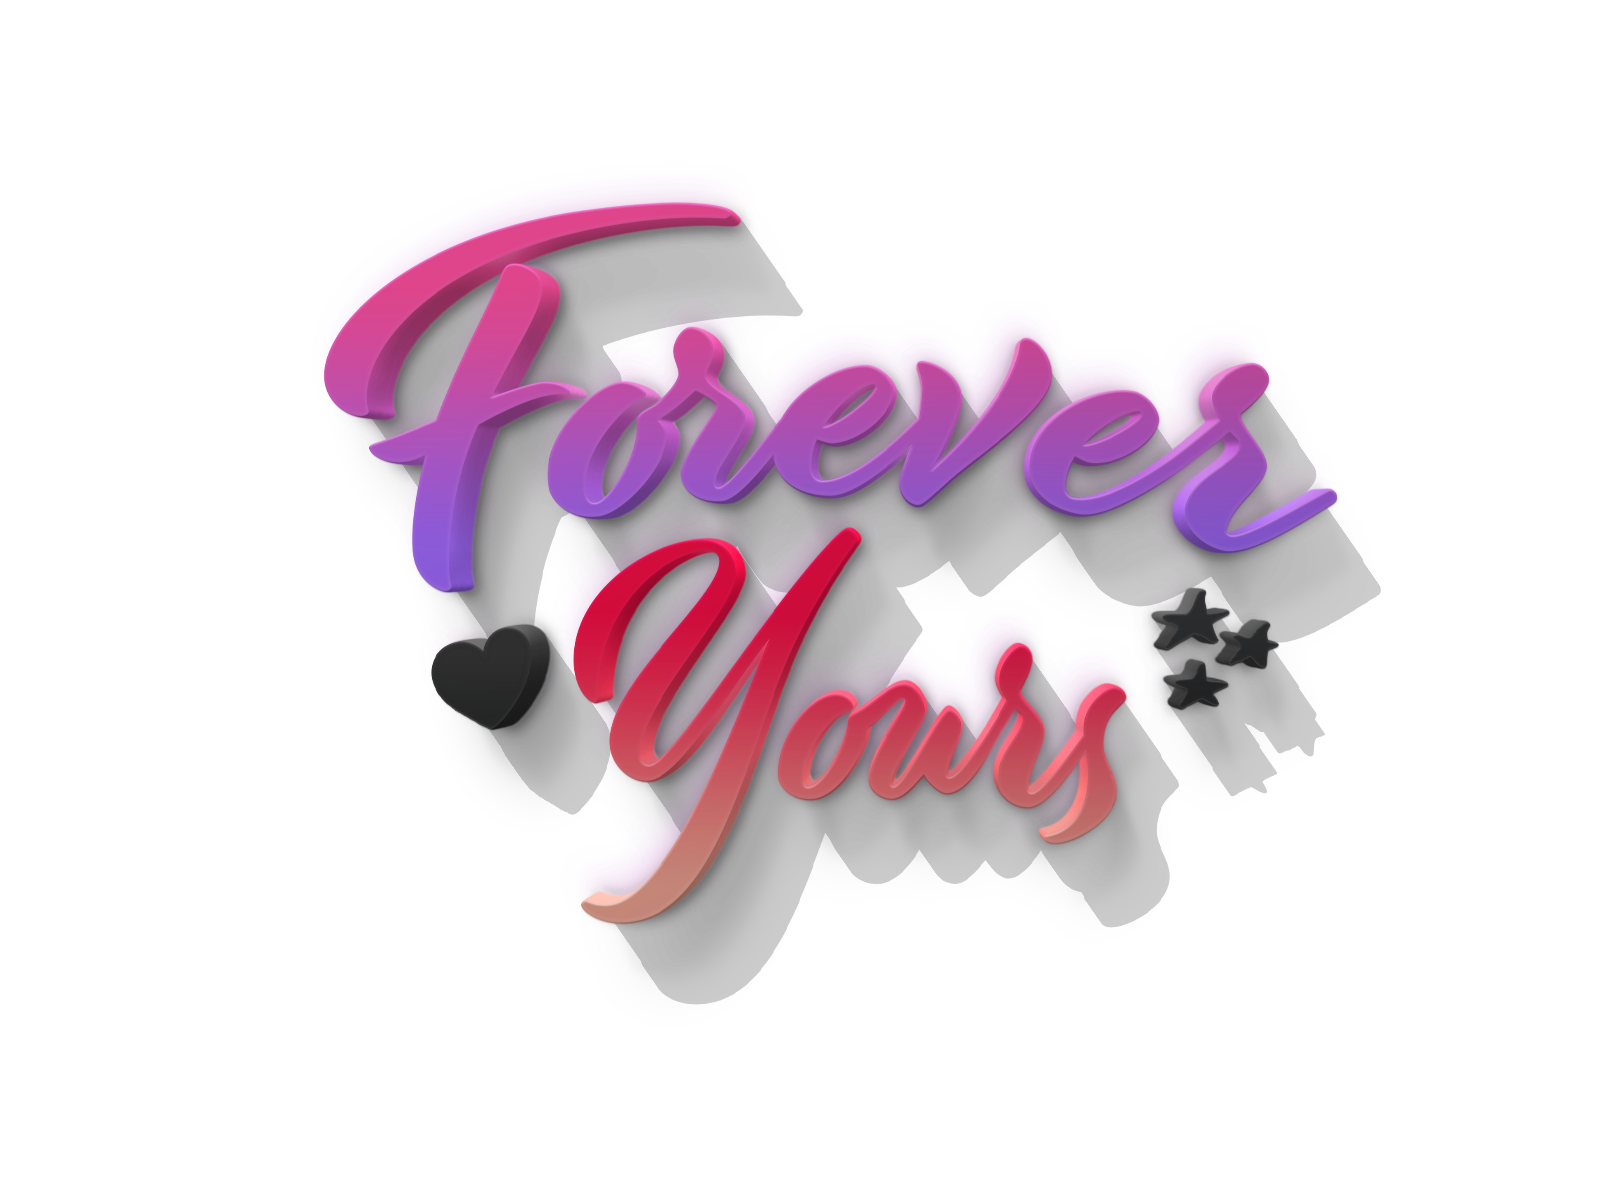 Pink and red text "Forever Yours" over transparent background